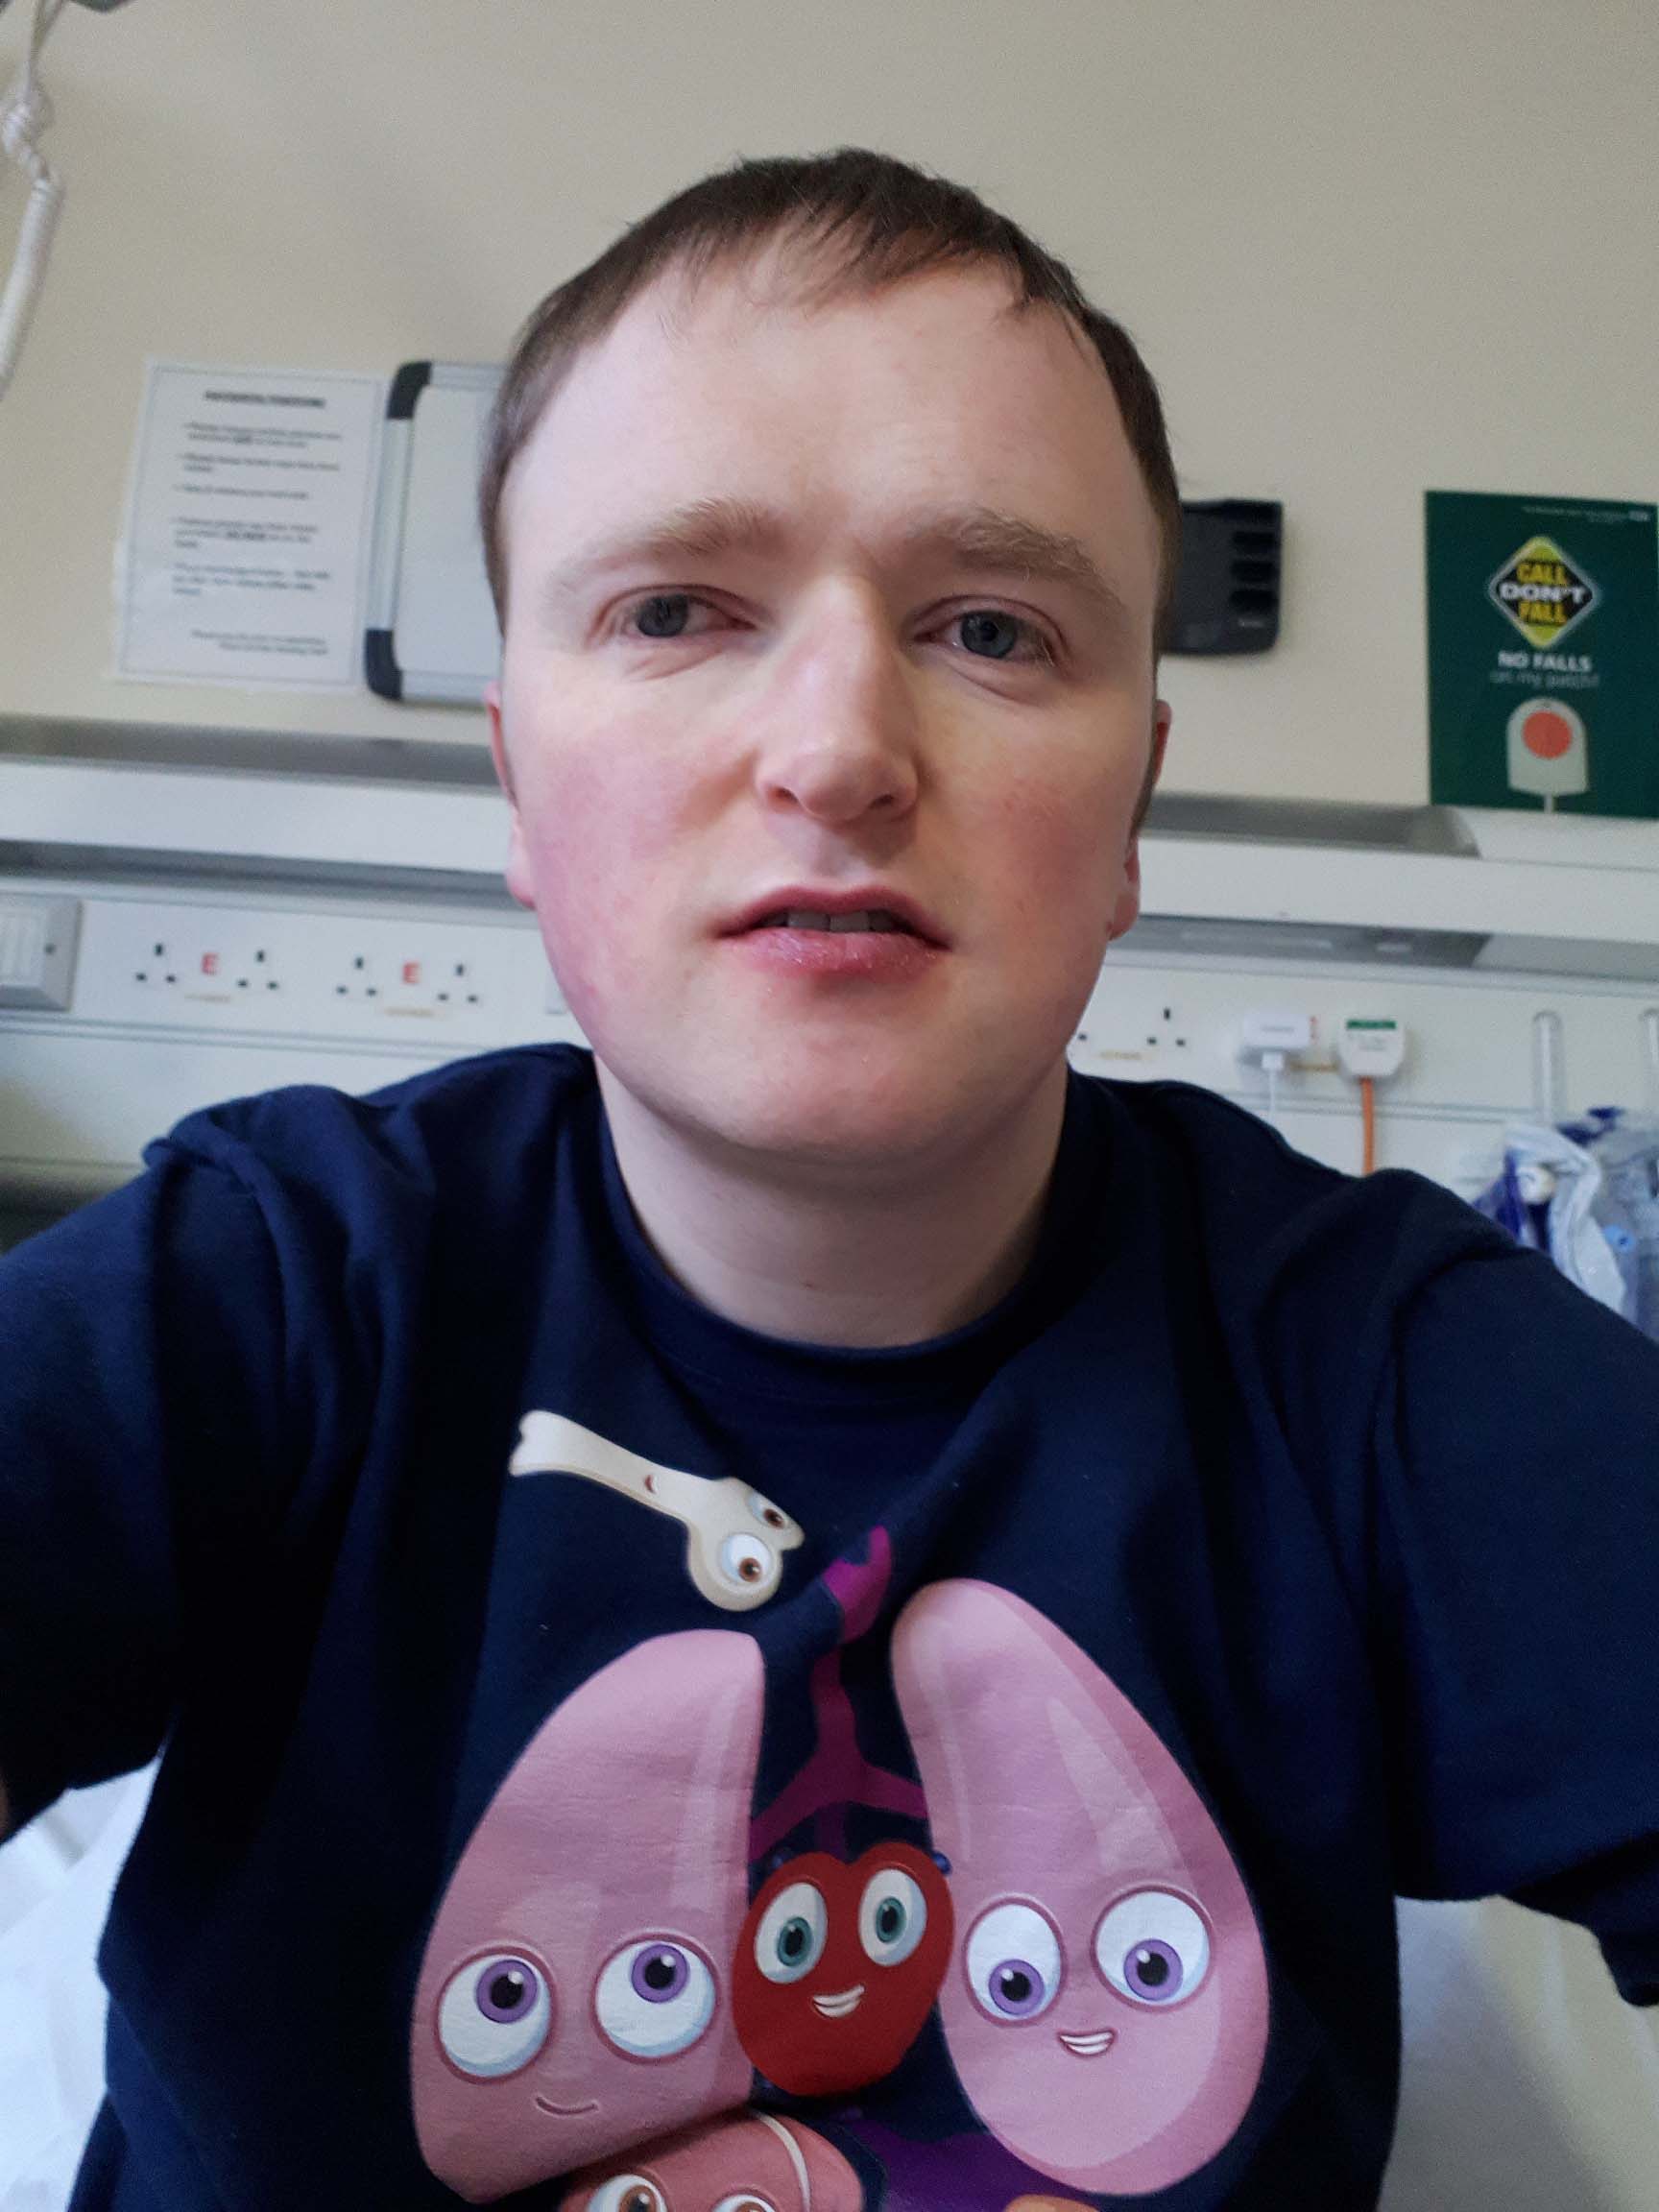 Patrick sits on a hospital bed wearing an organs t-shirt